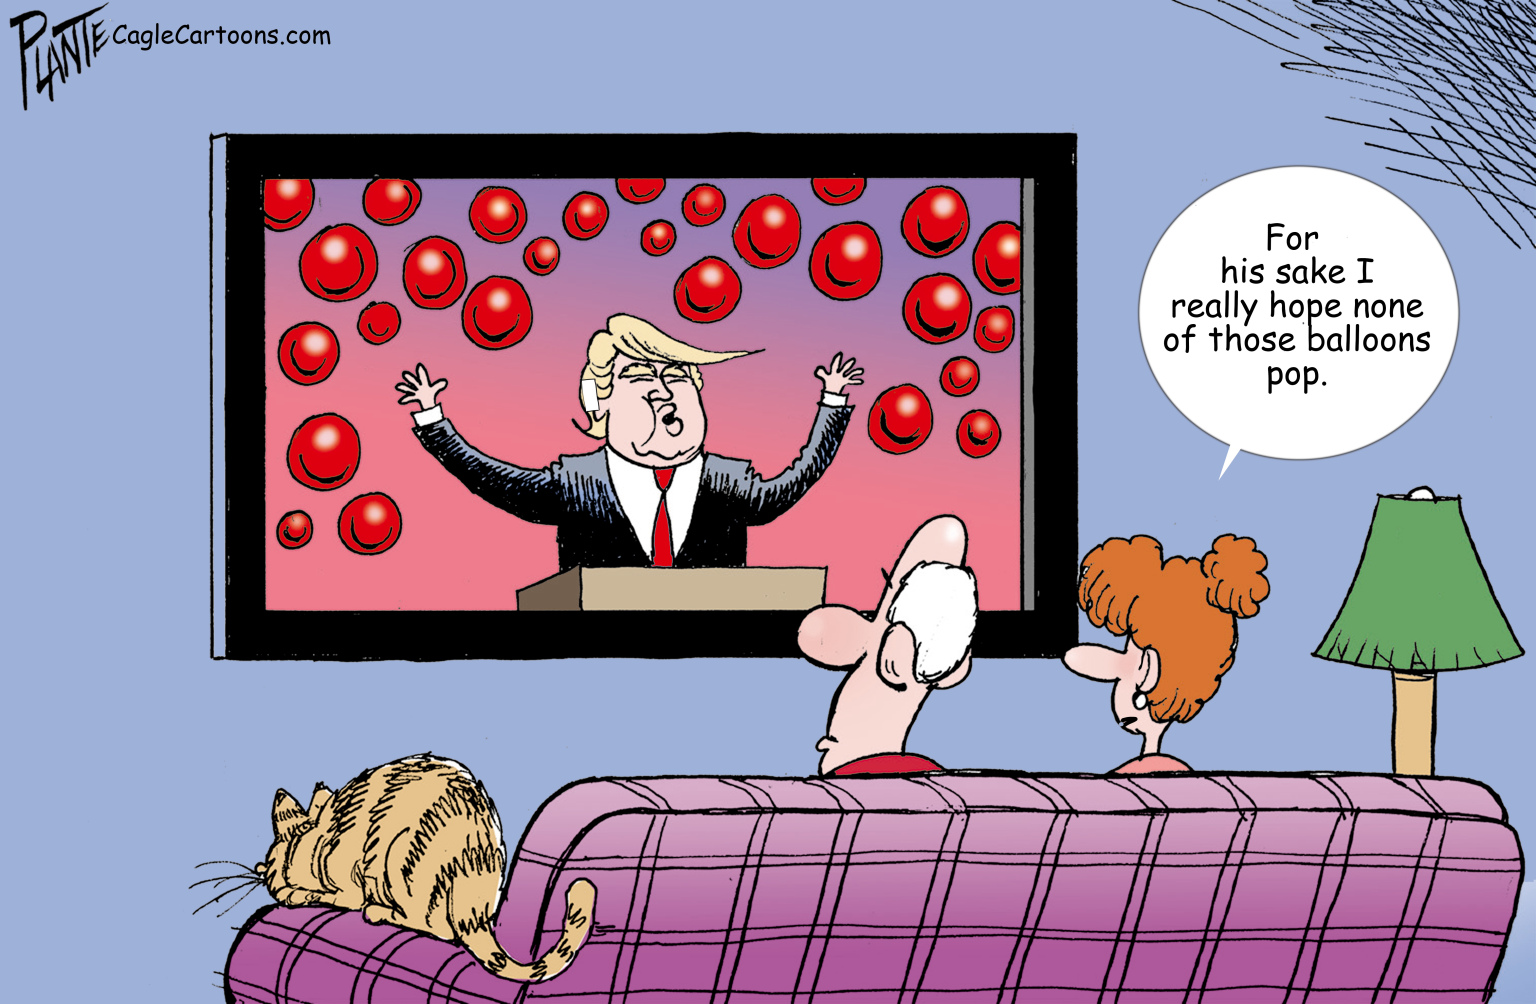  5 close shave cartoons about the Trump assassination attempt 